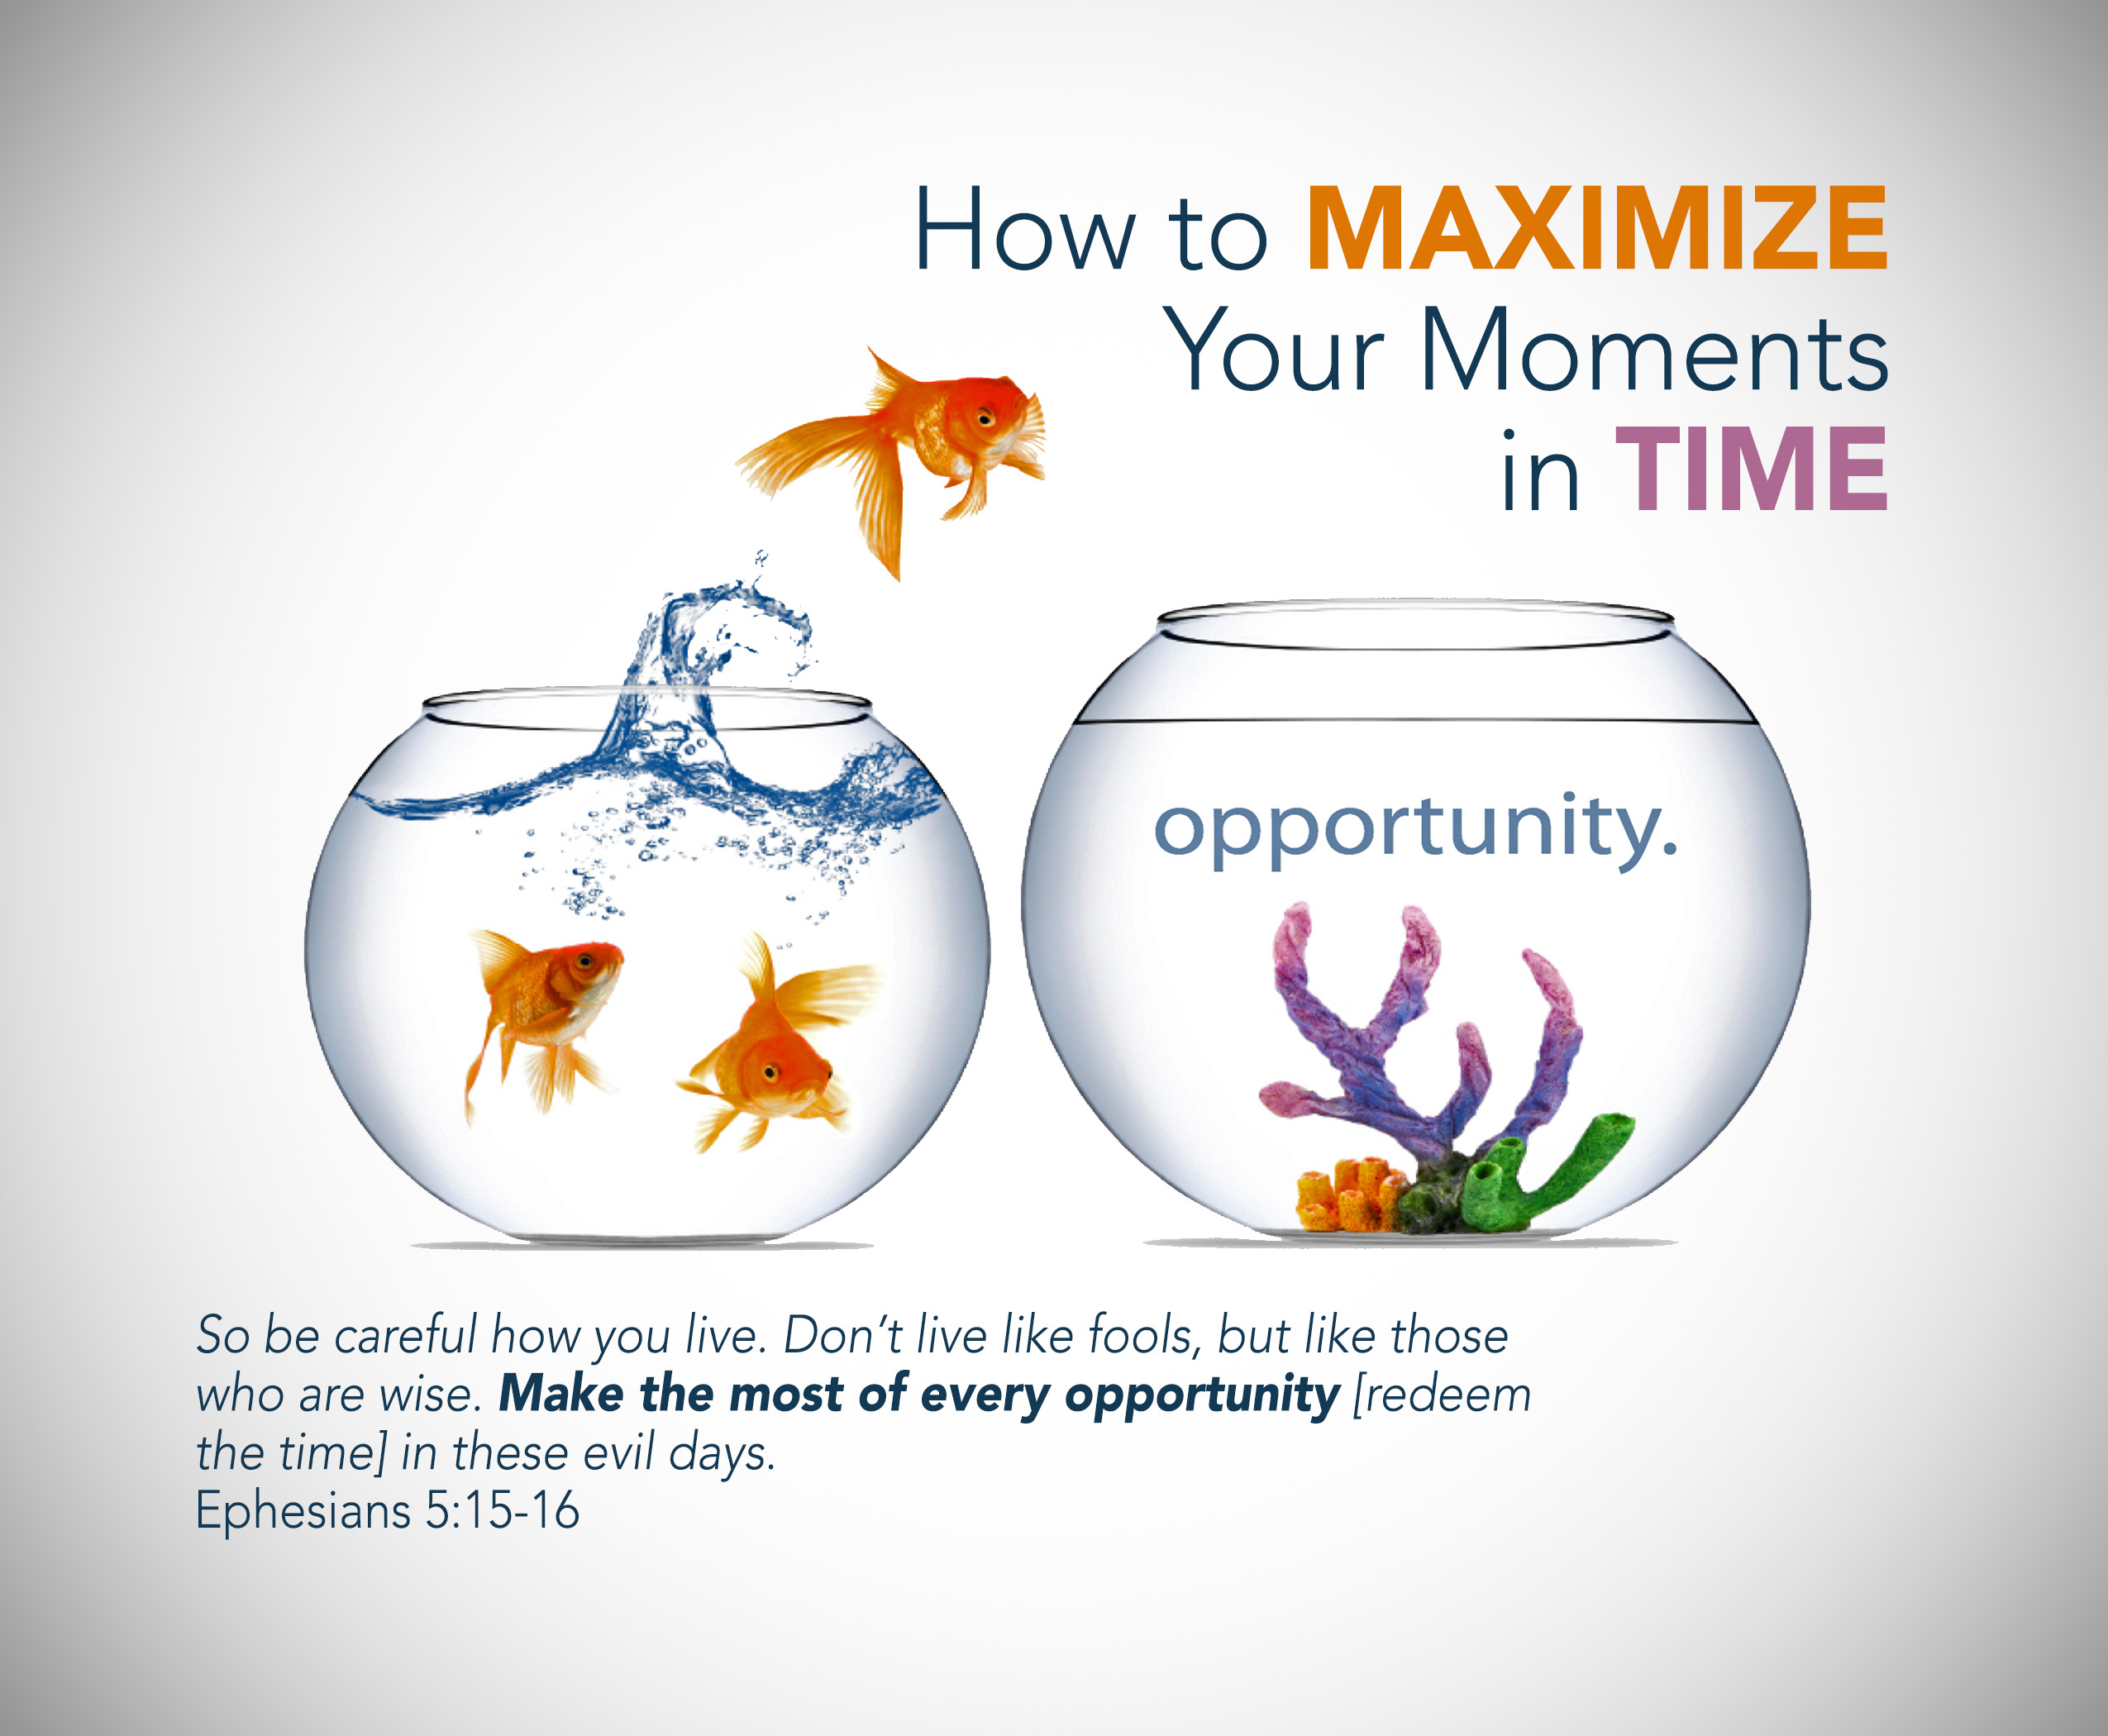 How to Maximize Moments in Time